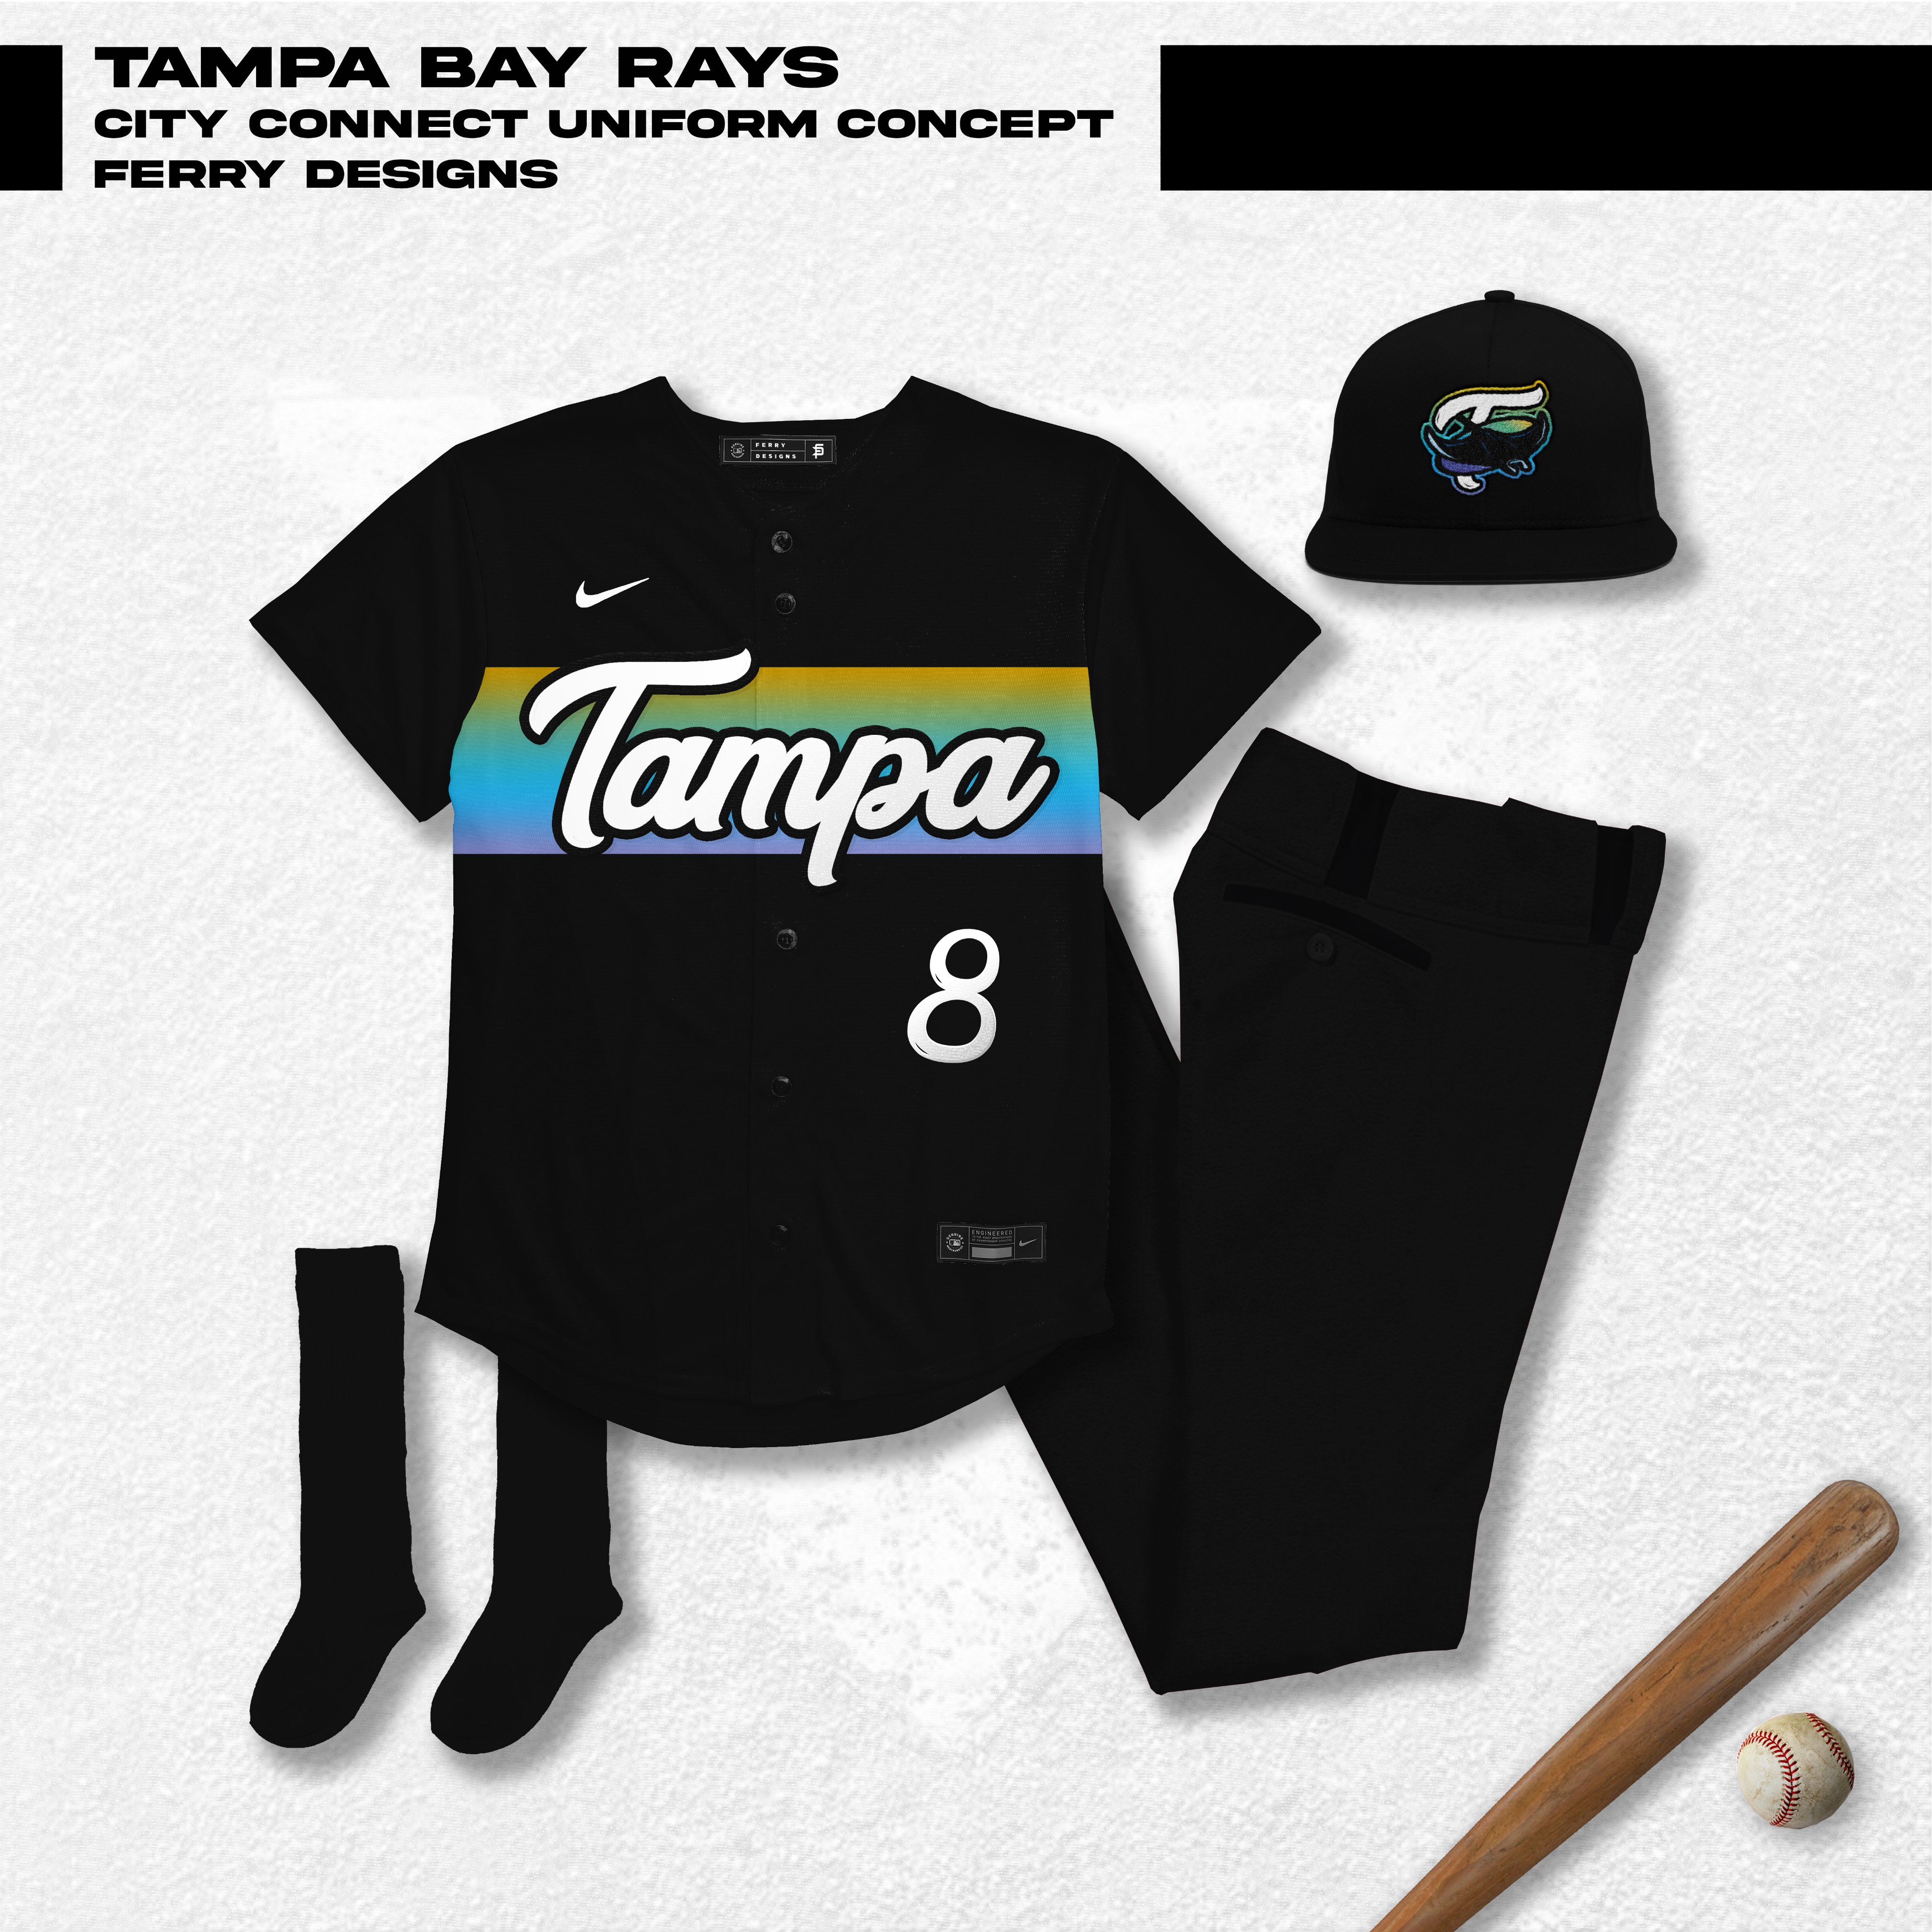 rays city connect jersey concept